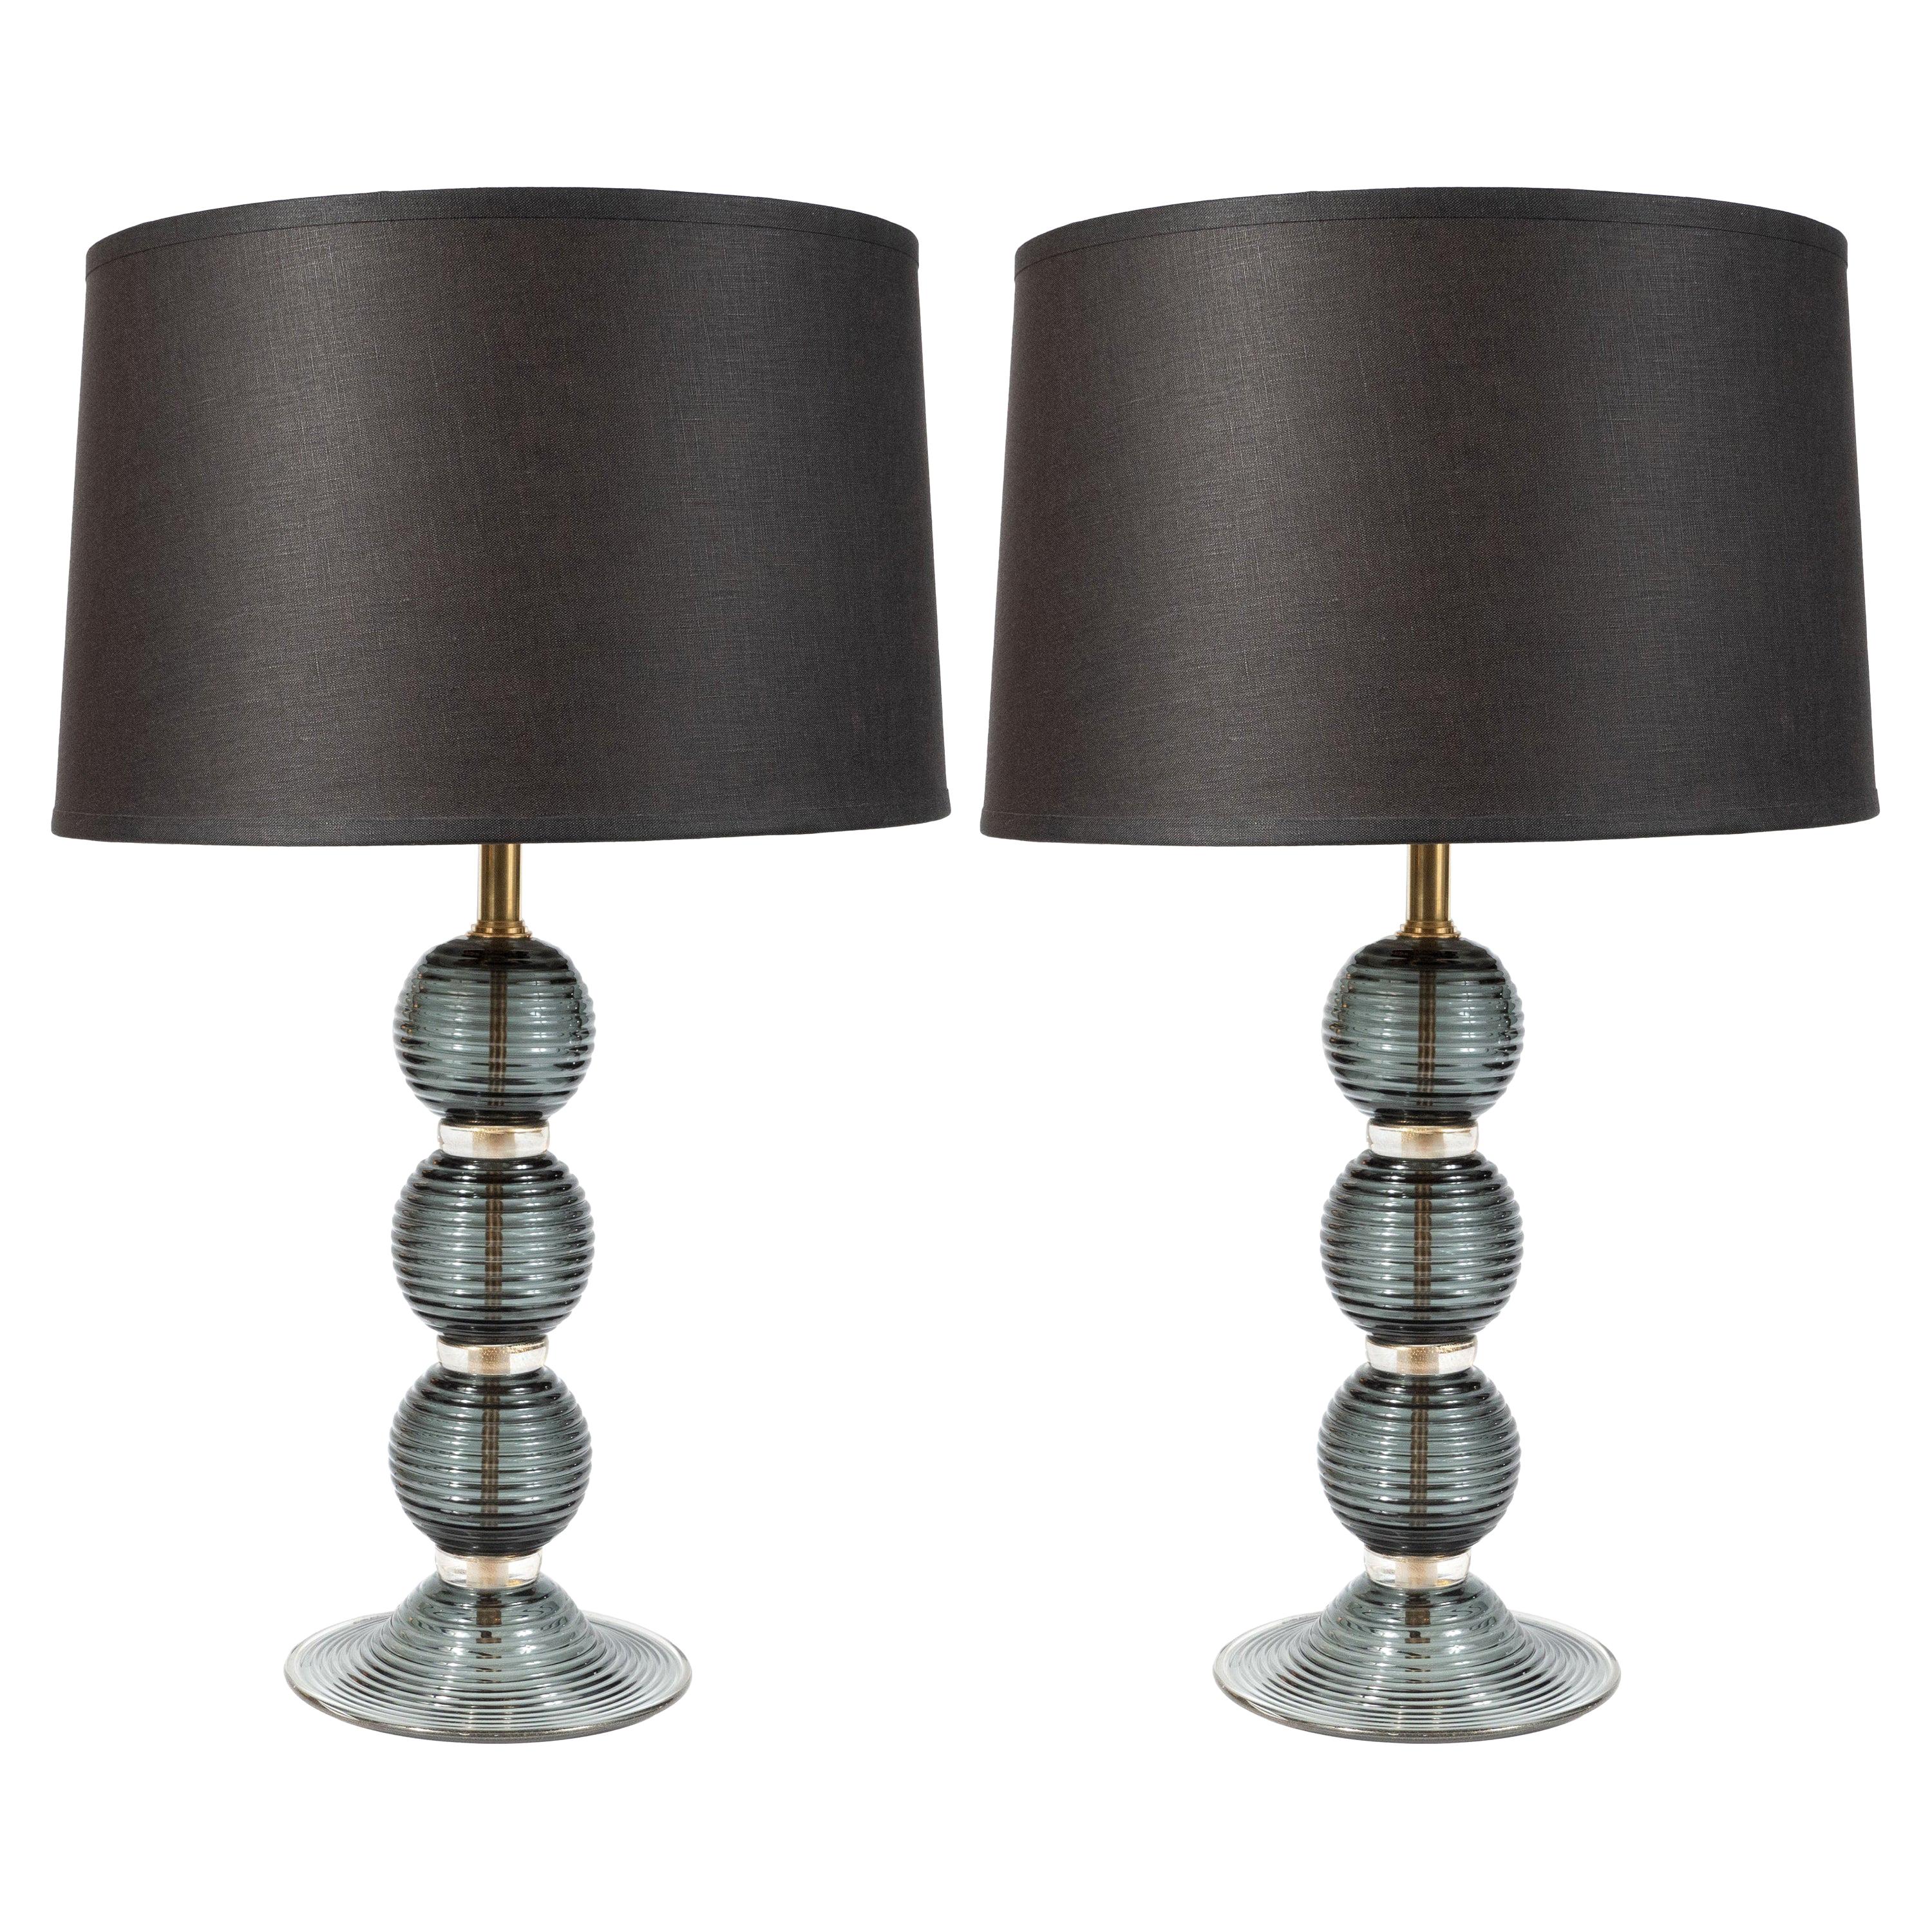 Pair of Hand Blown Murano Ribbed & Smoked Glass Table Lamps with Brass Fittings